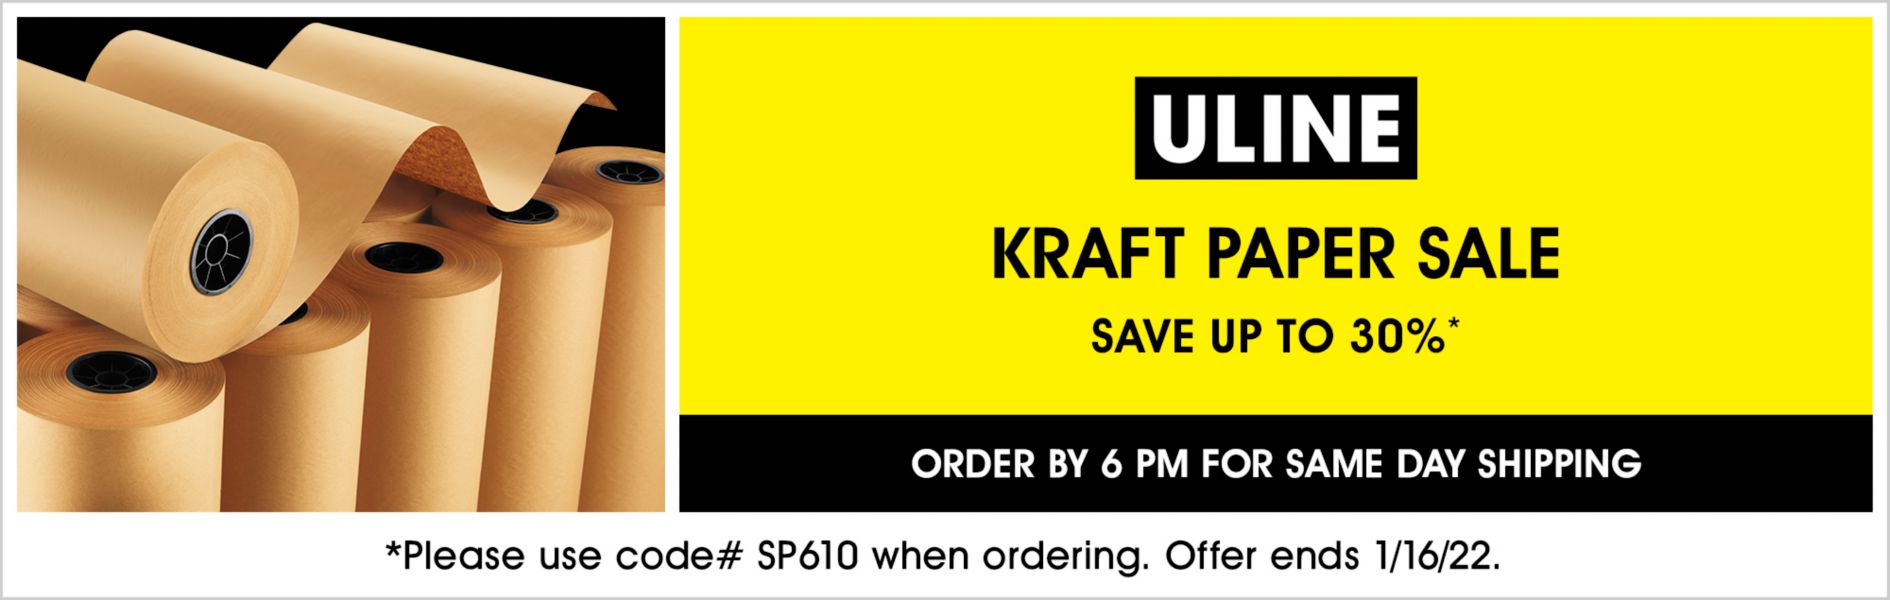 SP610 Kraft Paper Sale, Save up to 30%, Use code SP610, Offer ends 1/16/22